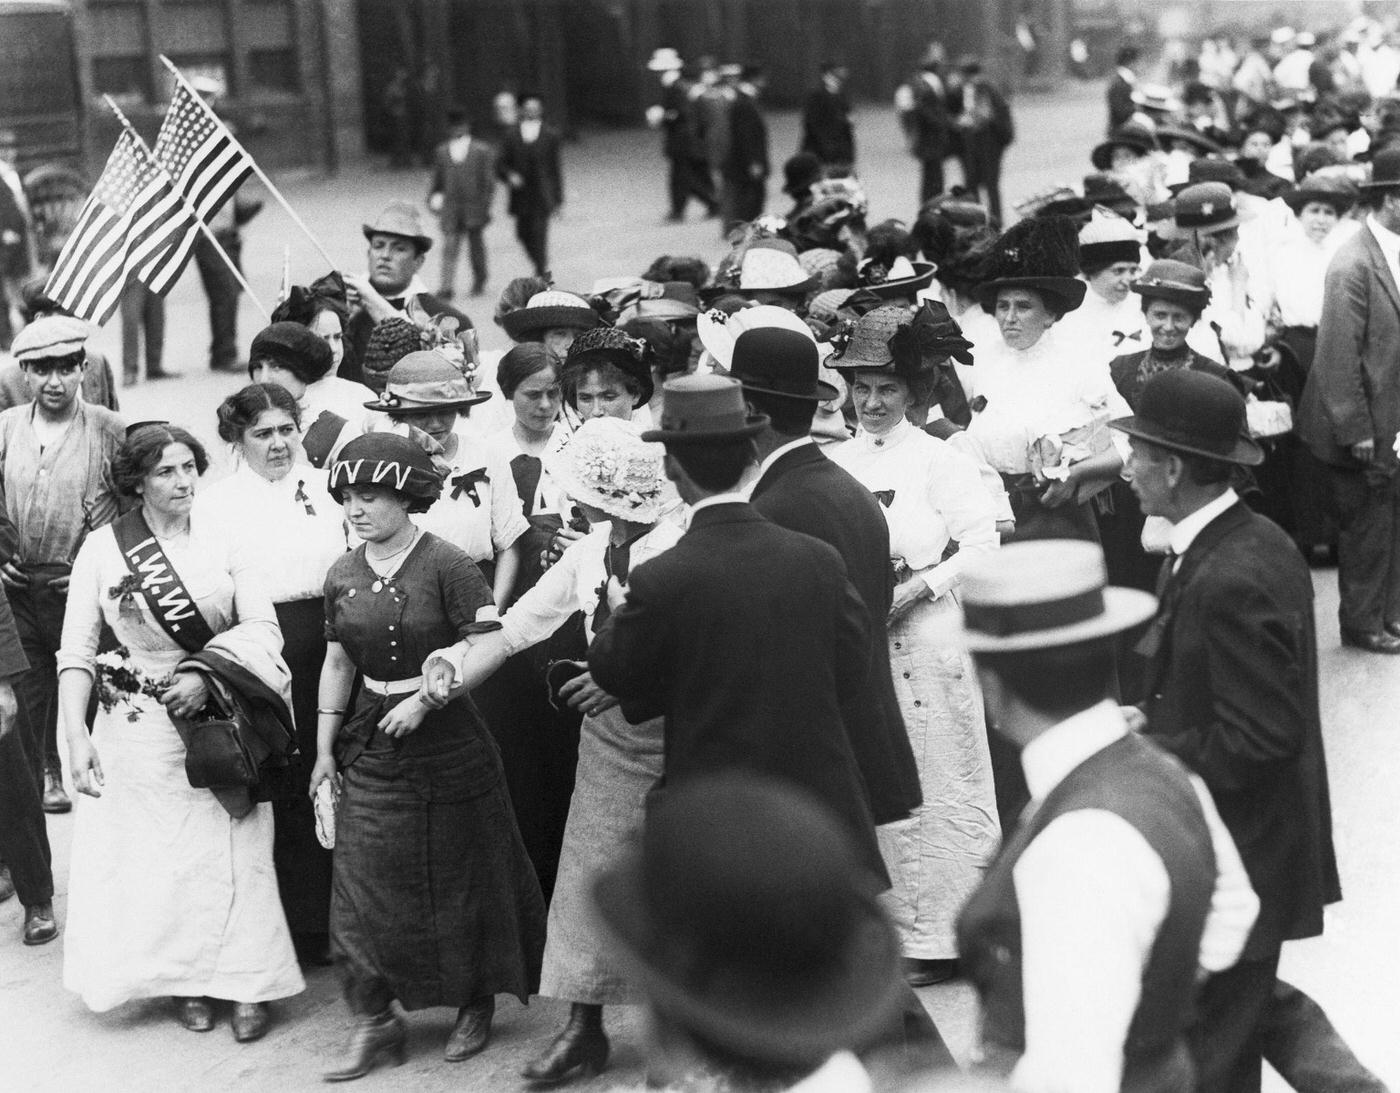 Women Of The Iww Marching To Madison Square Garden, New York City, 1913